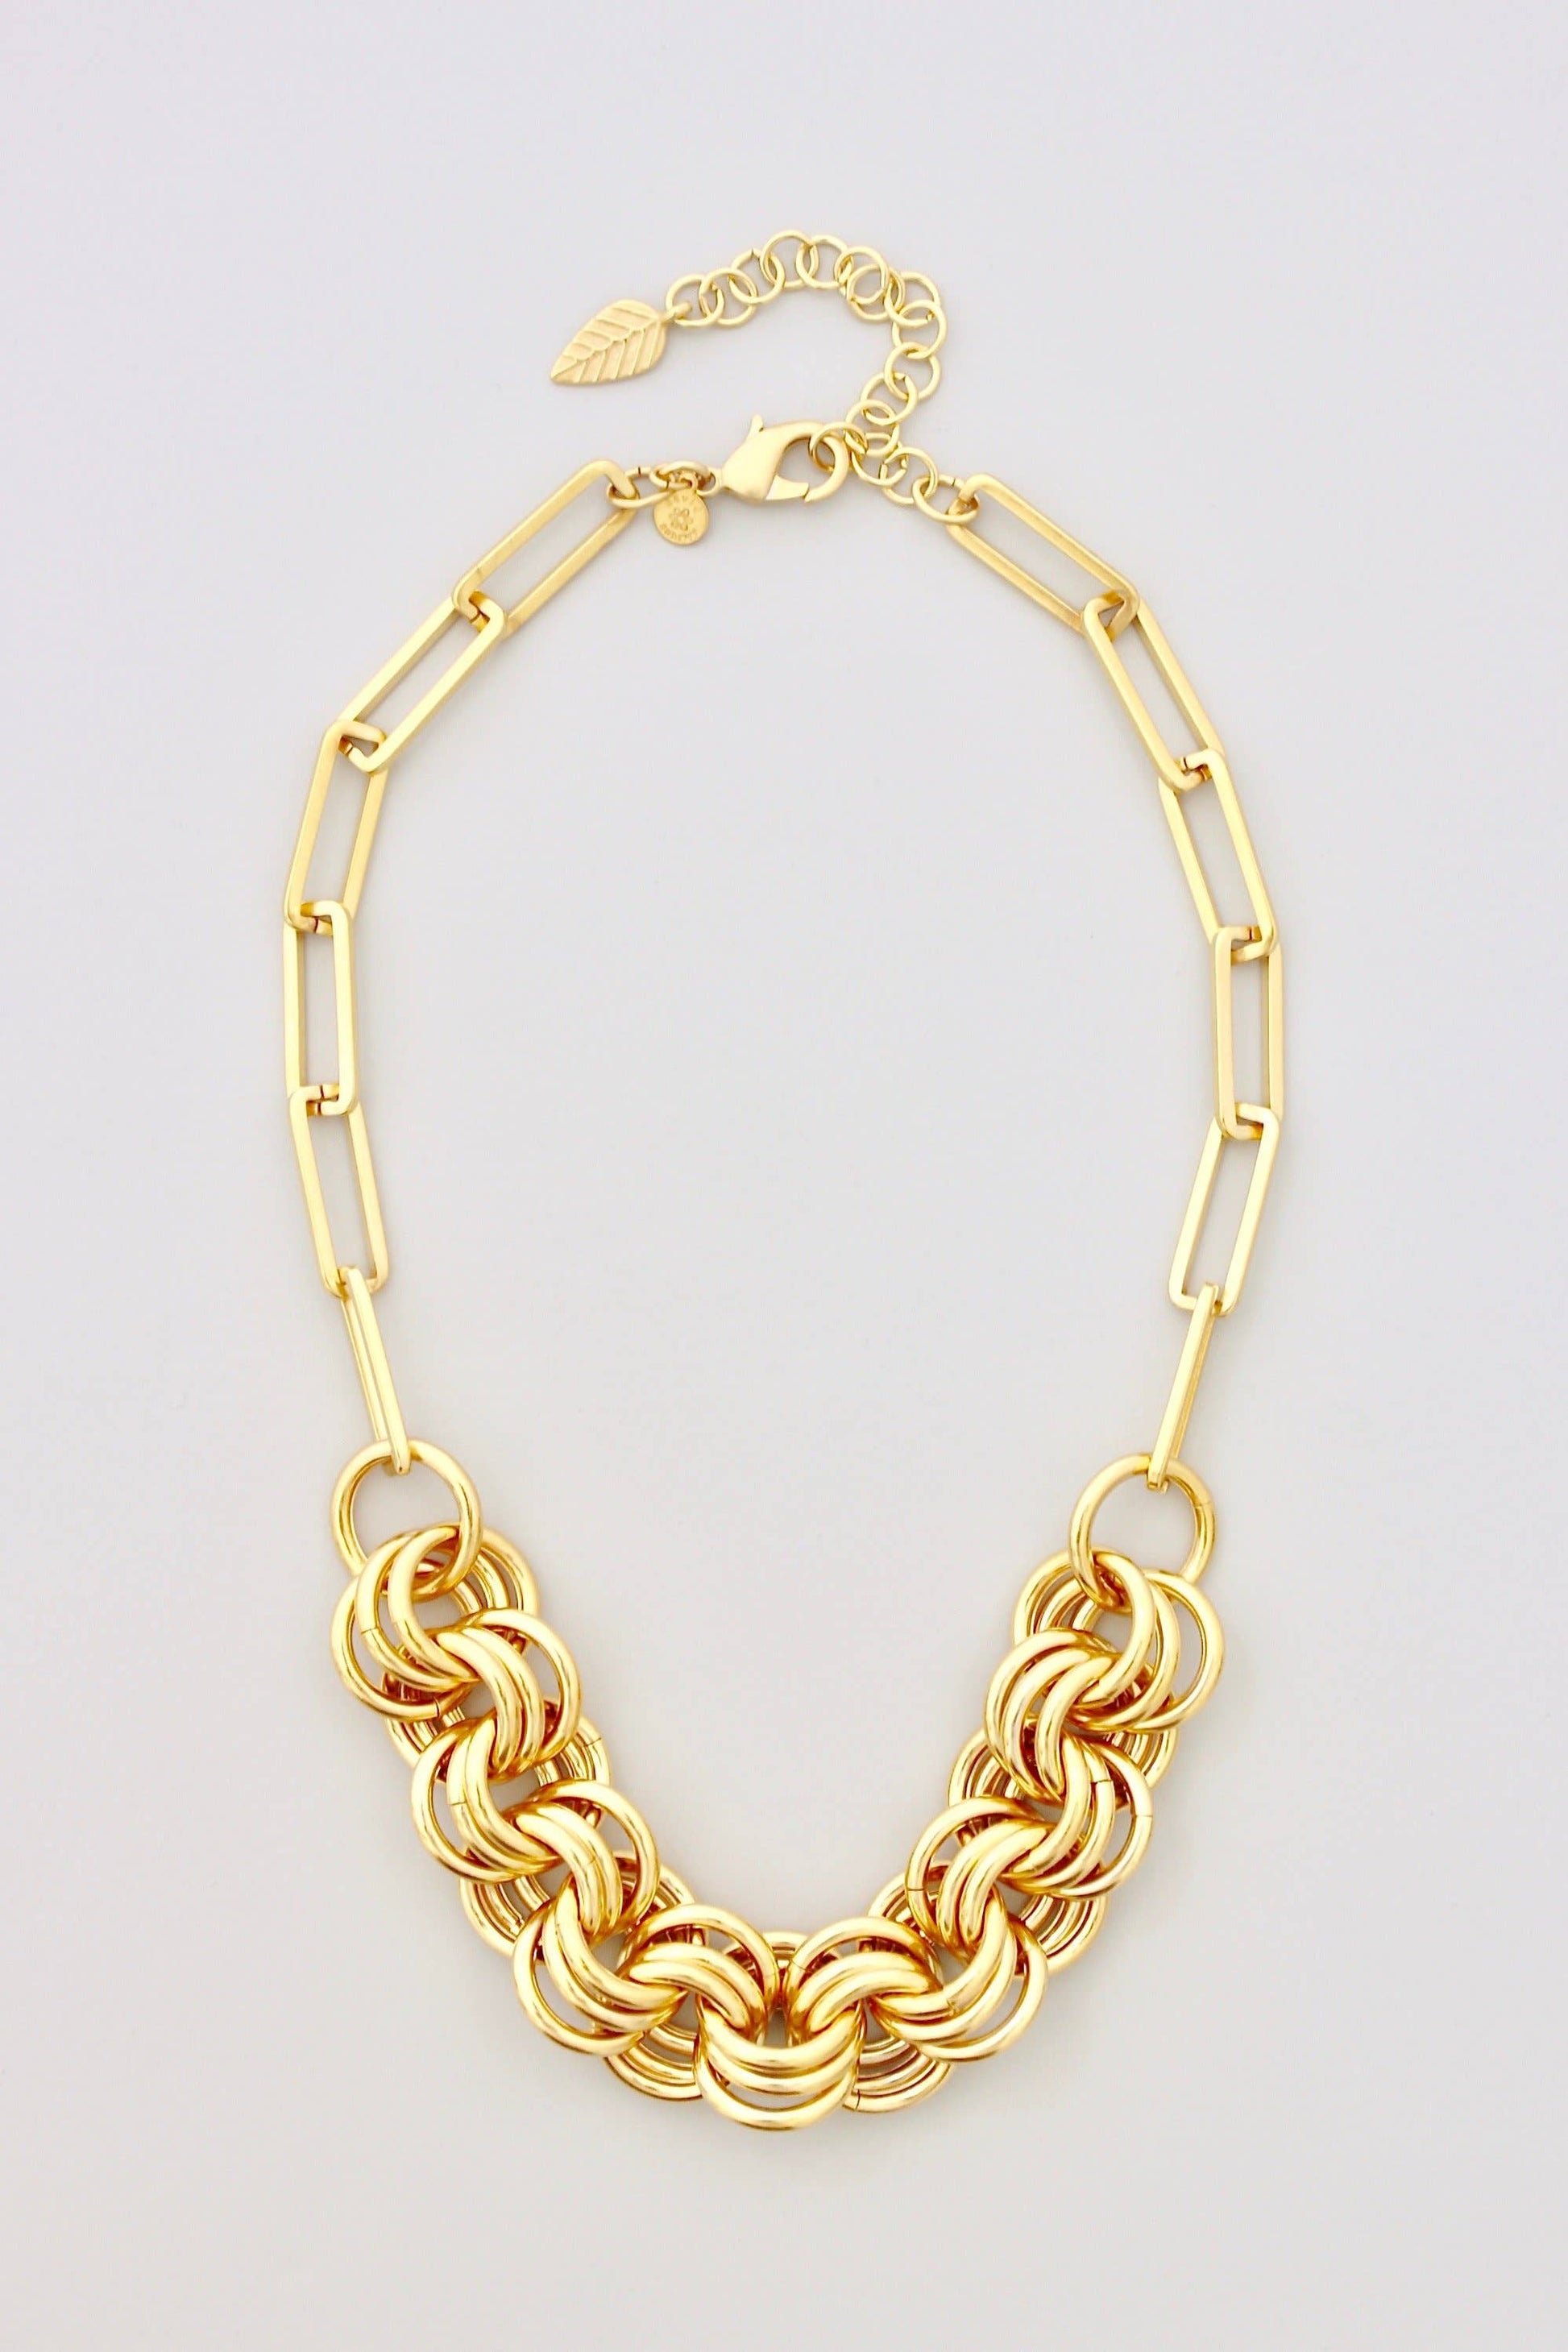 18” 18k gold plated brass chain necklace with 3 inch extender against a light grey background